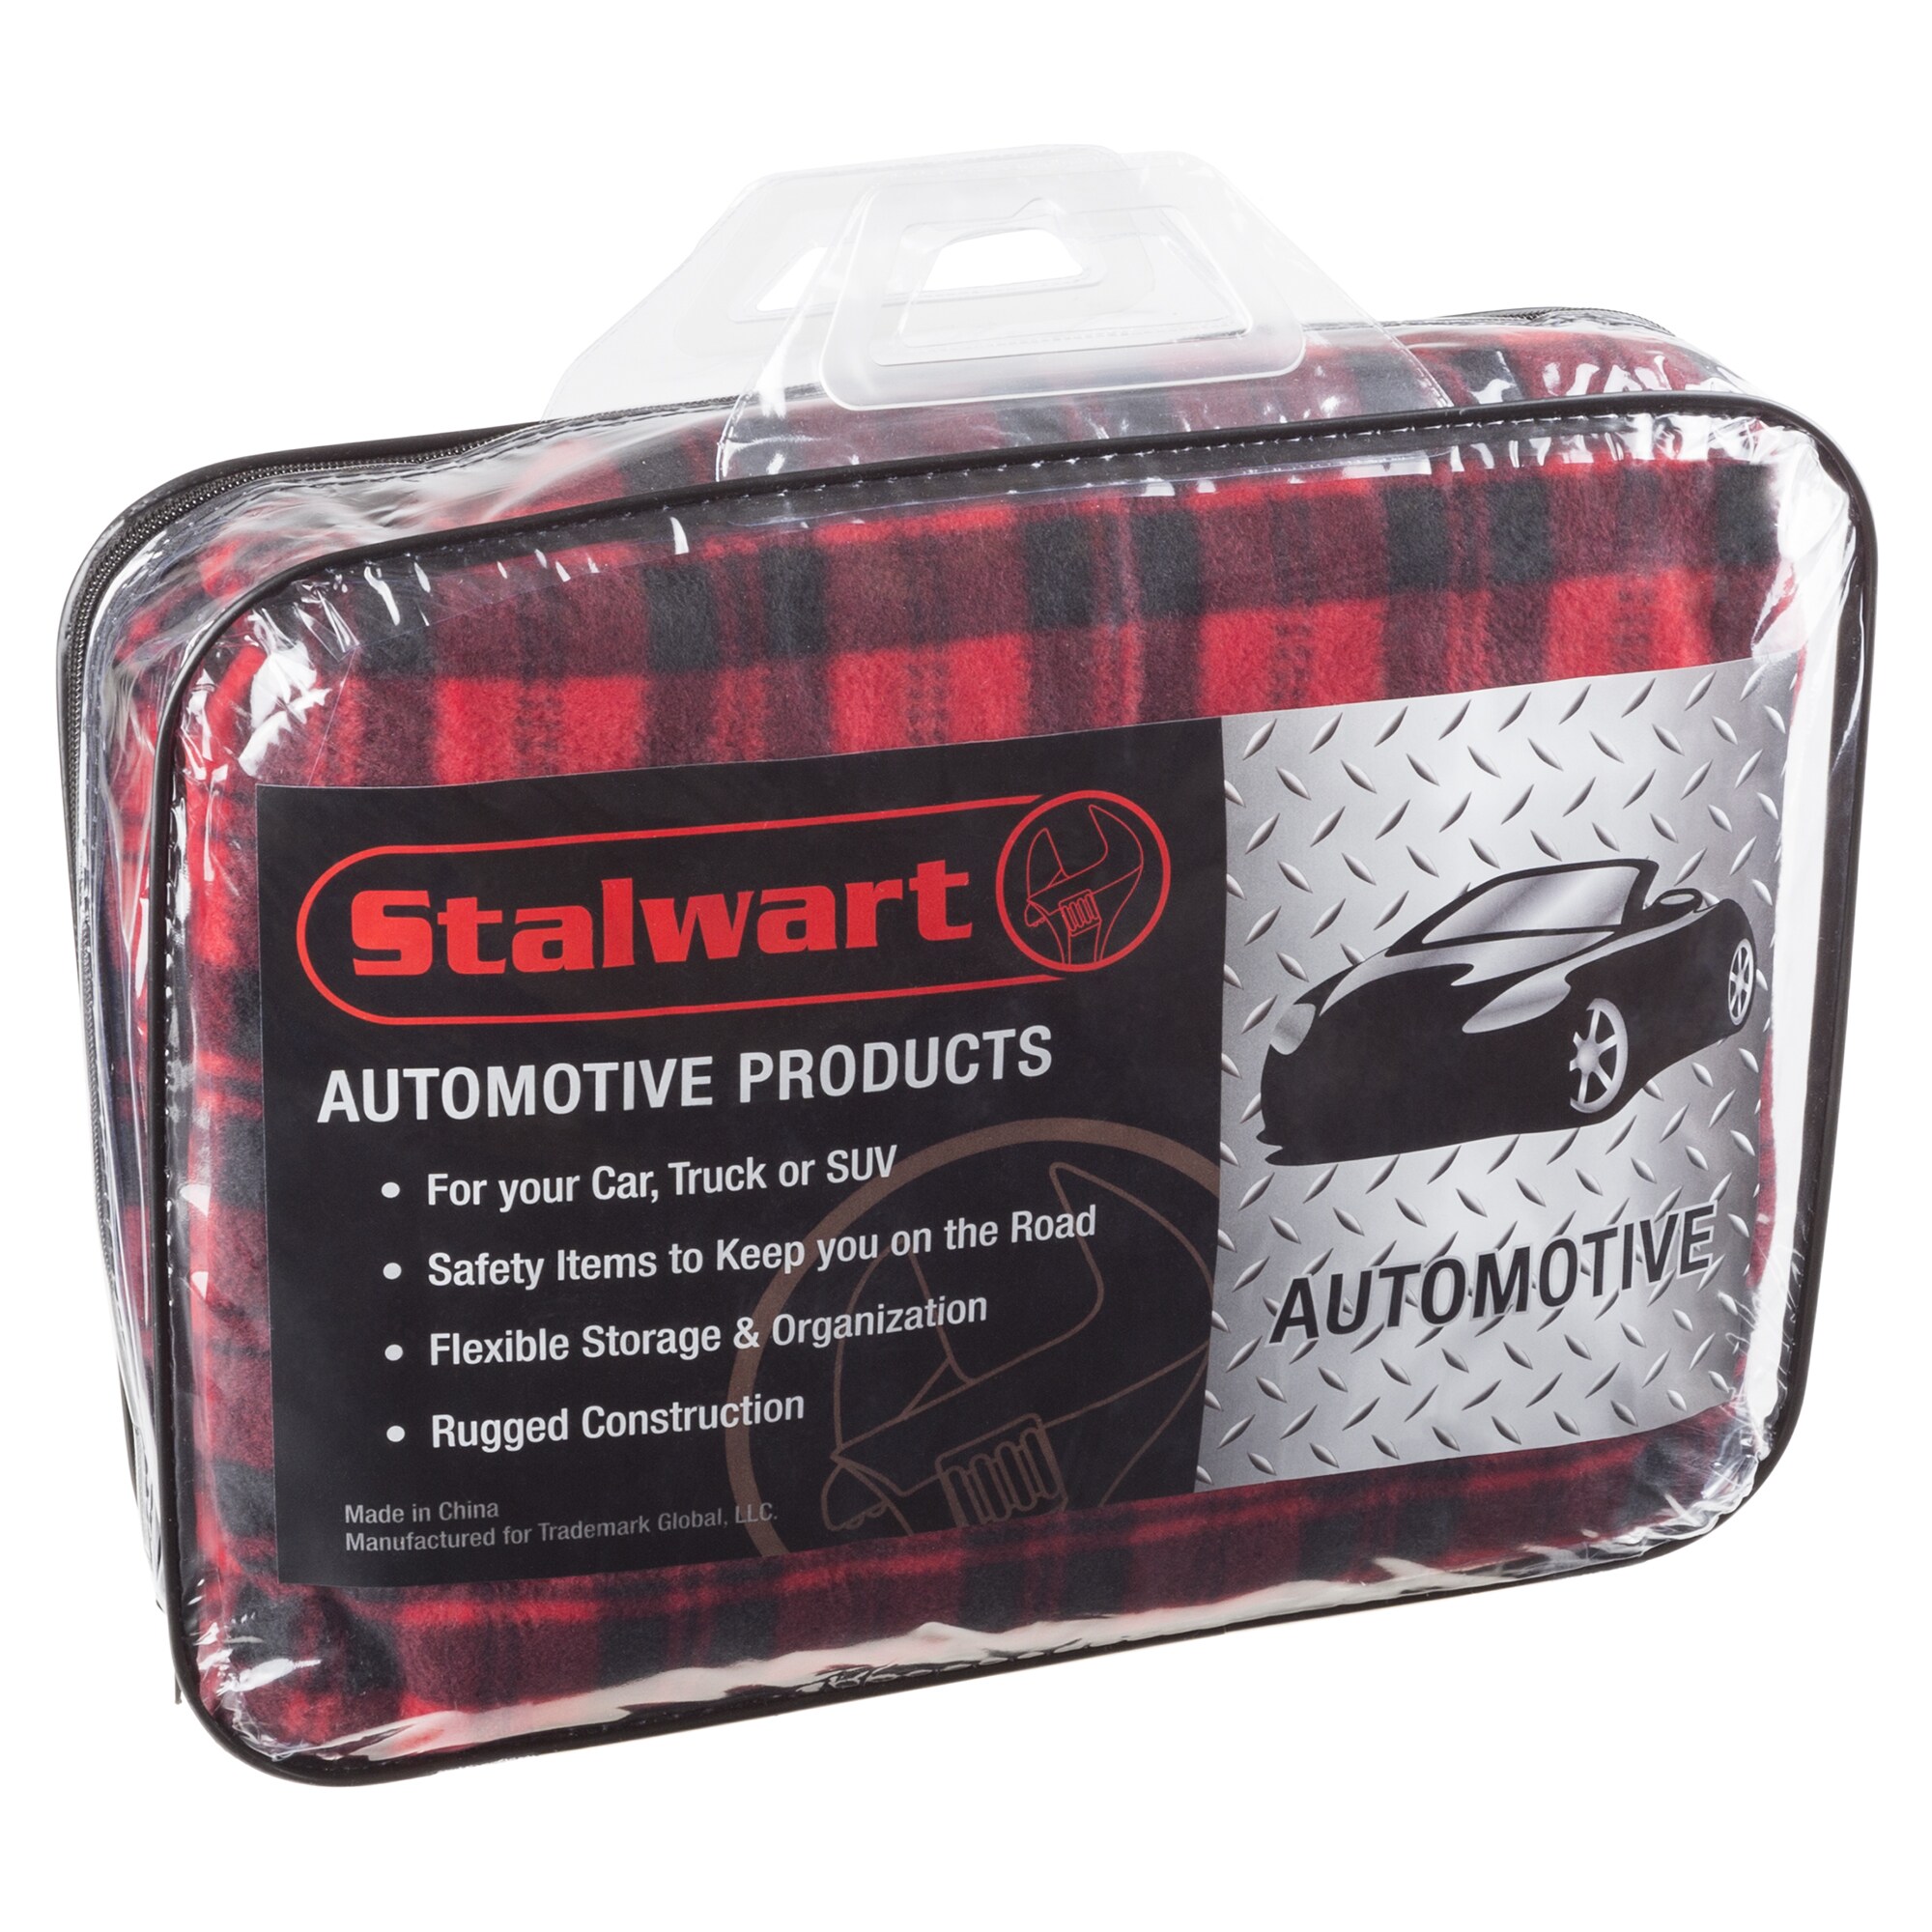 https://ak1.ostkcdn.com/images/products/14101568/Stalwart-12-Volt-Red-Plaid-Electric-Blanket-for-Automobile-b272cd73-2902-4e21-815b-47b1f2bbe146.jpg